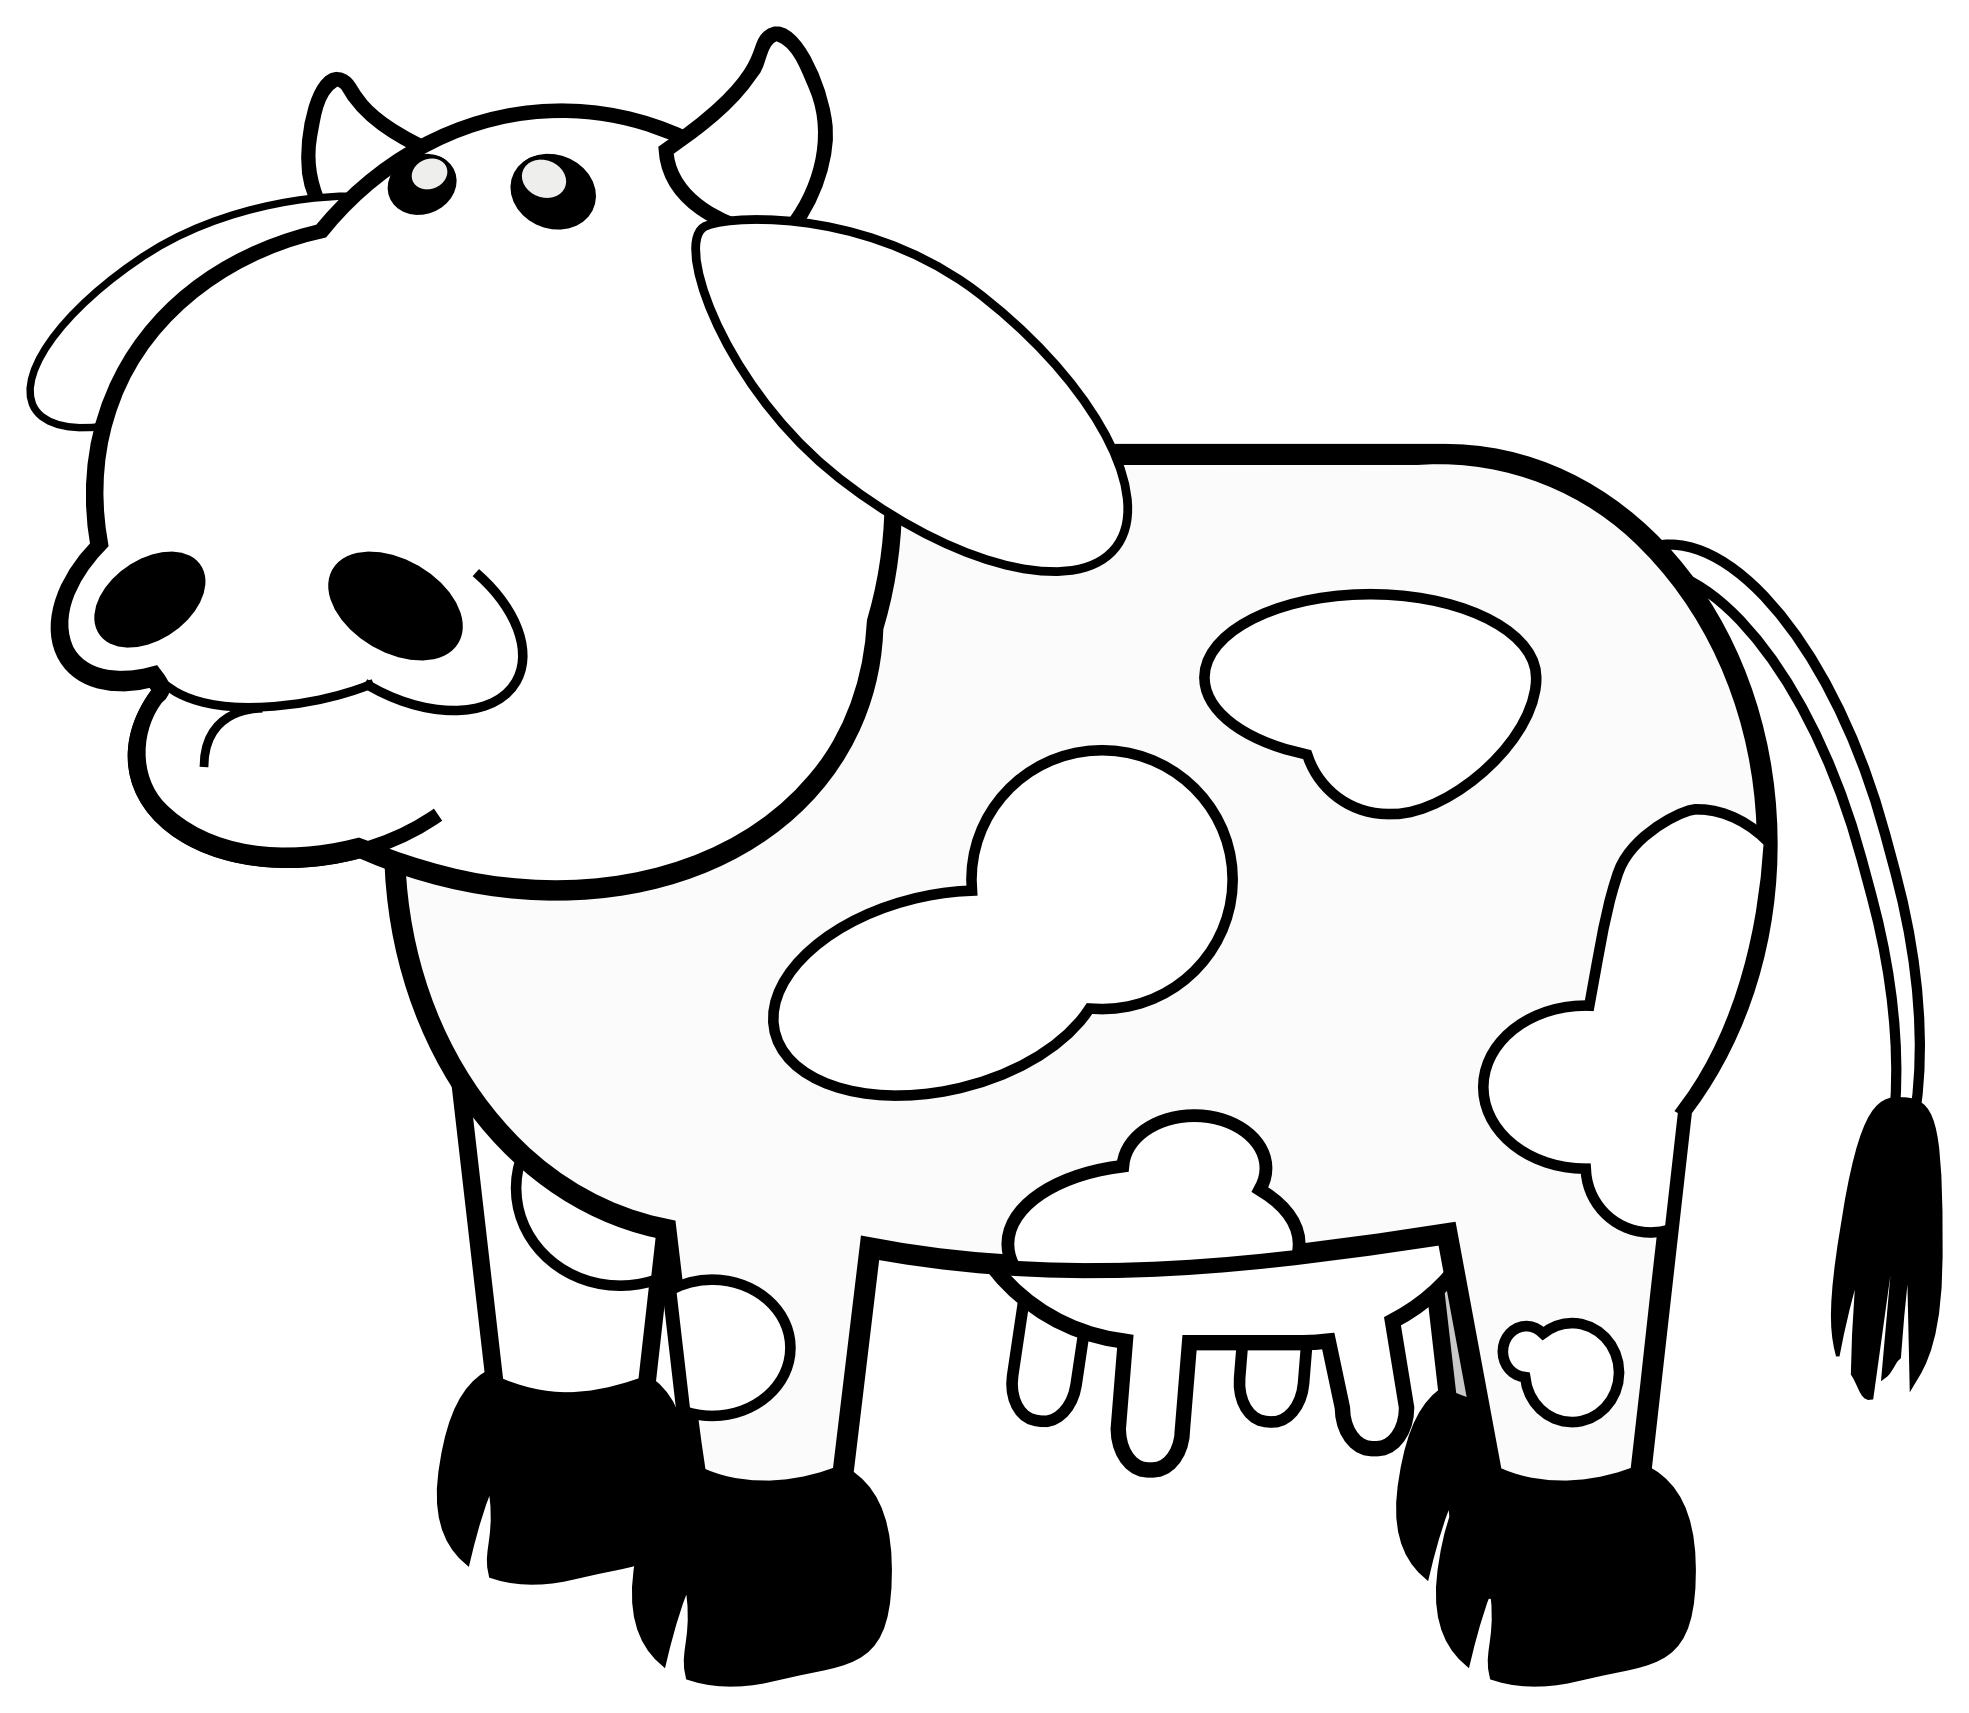 clipart cow black and white - photo #17